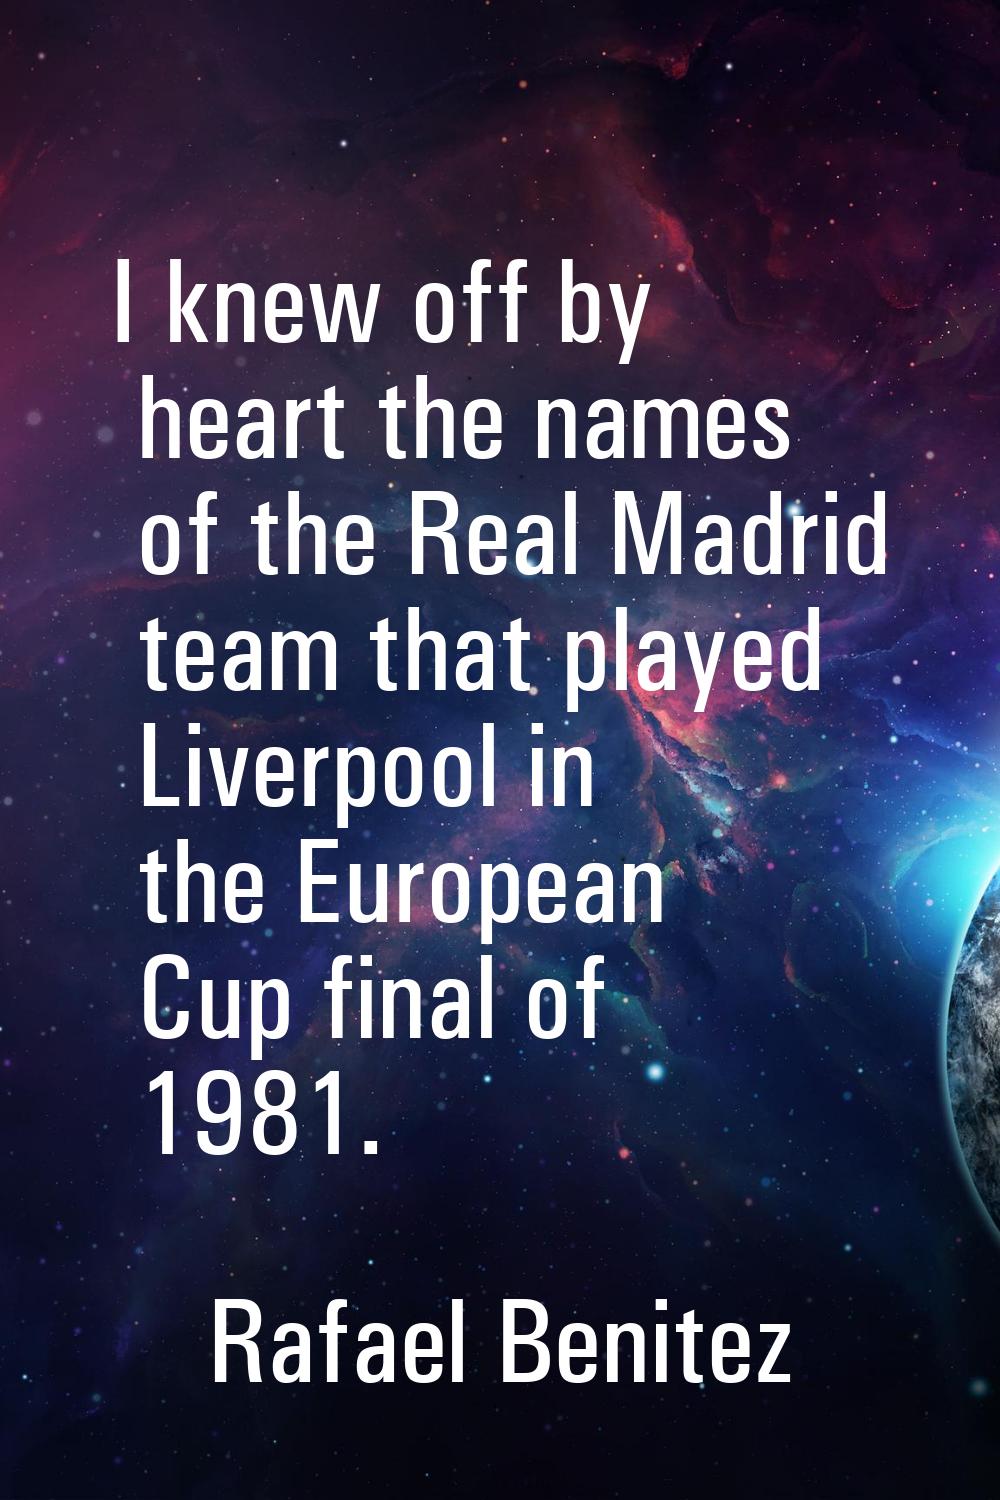 I knew off by heart the names of the Real Madrid team that played Liverpool in the European Cup fin